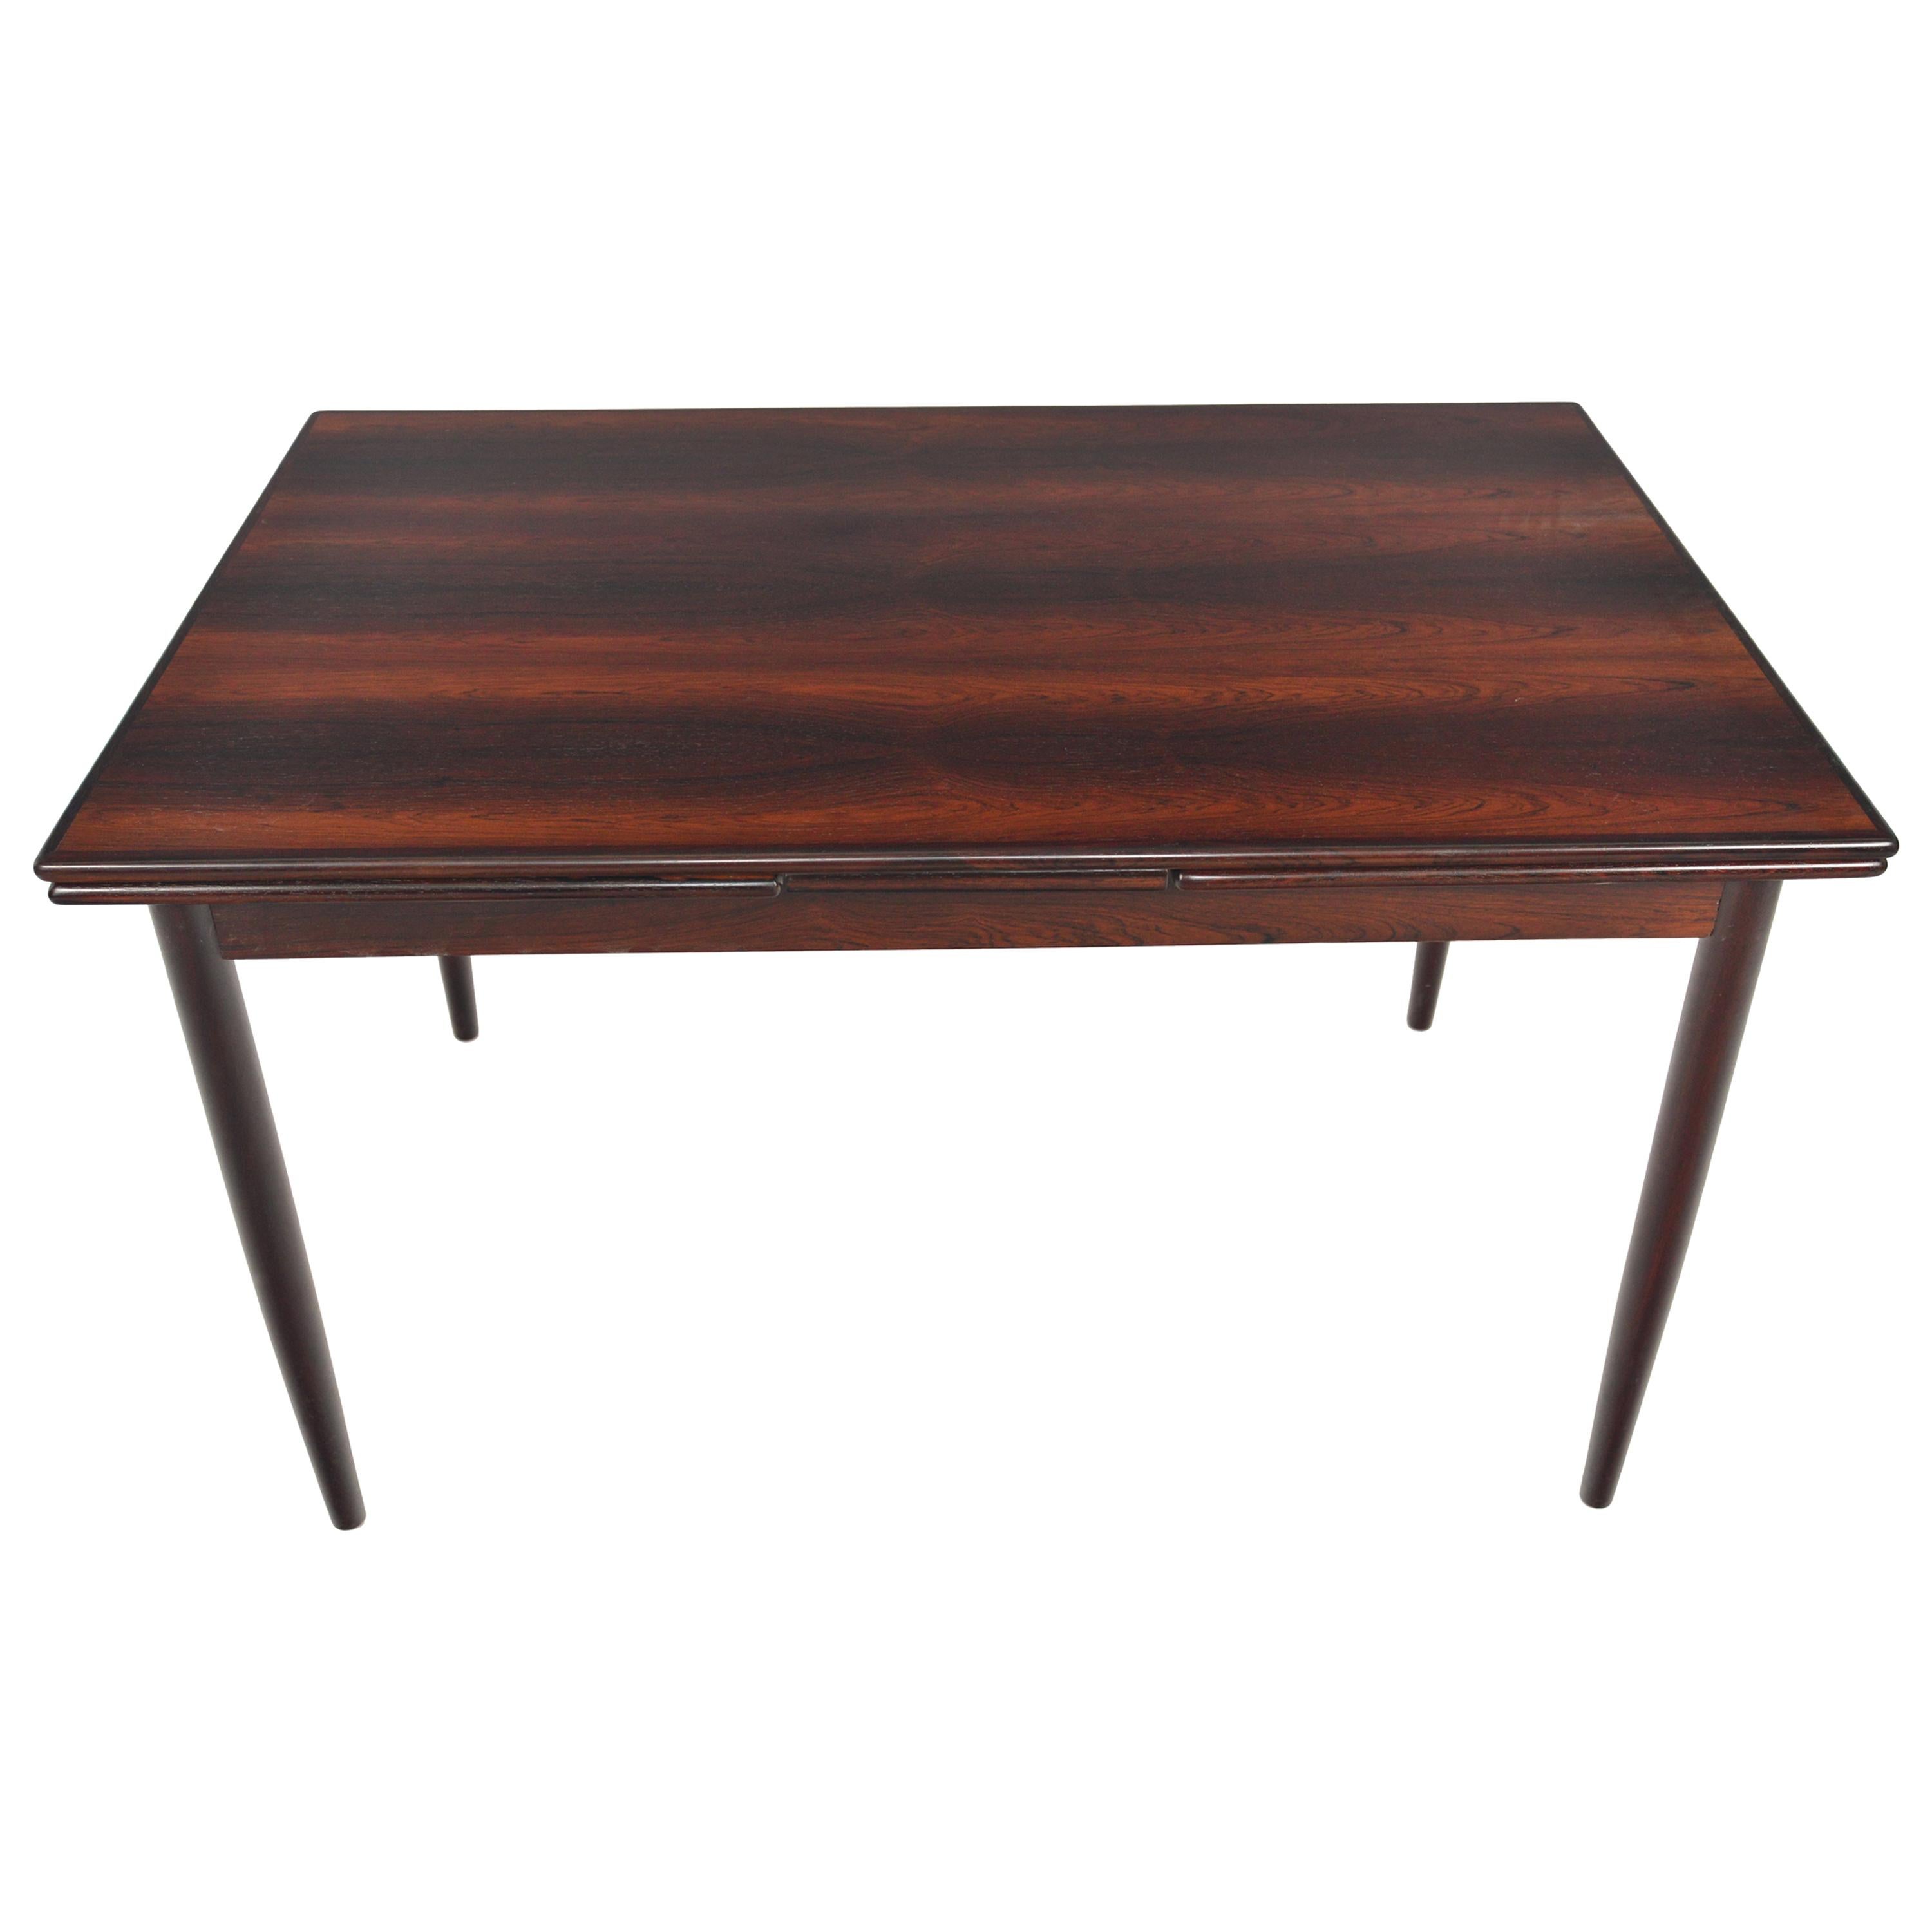 Refinished Brazilian Rosewood Draw Leaf Dining Table